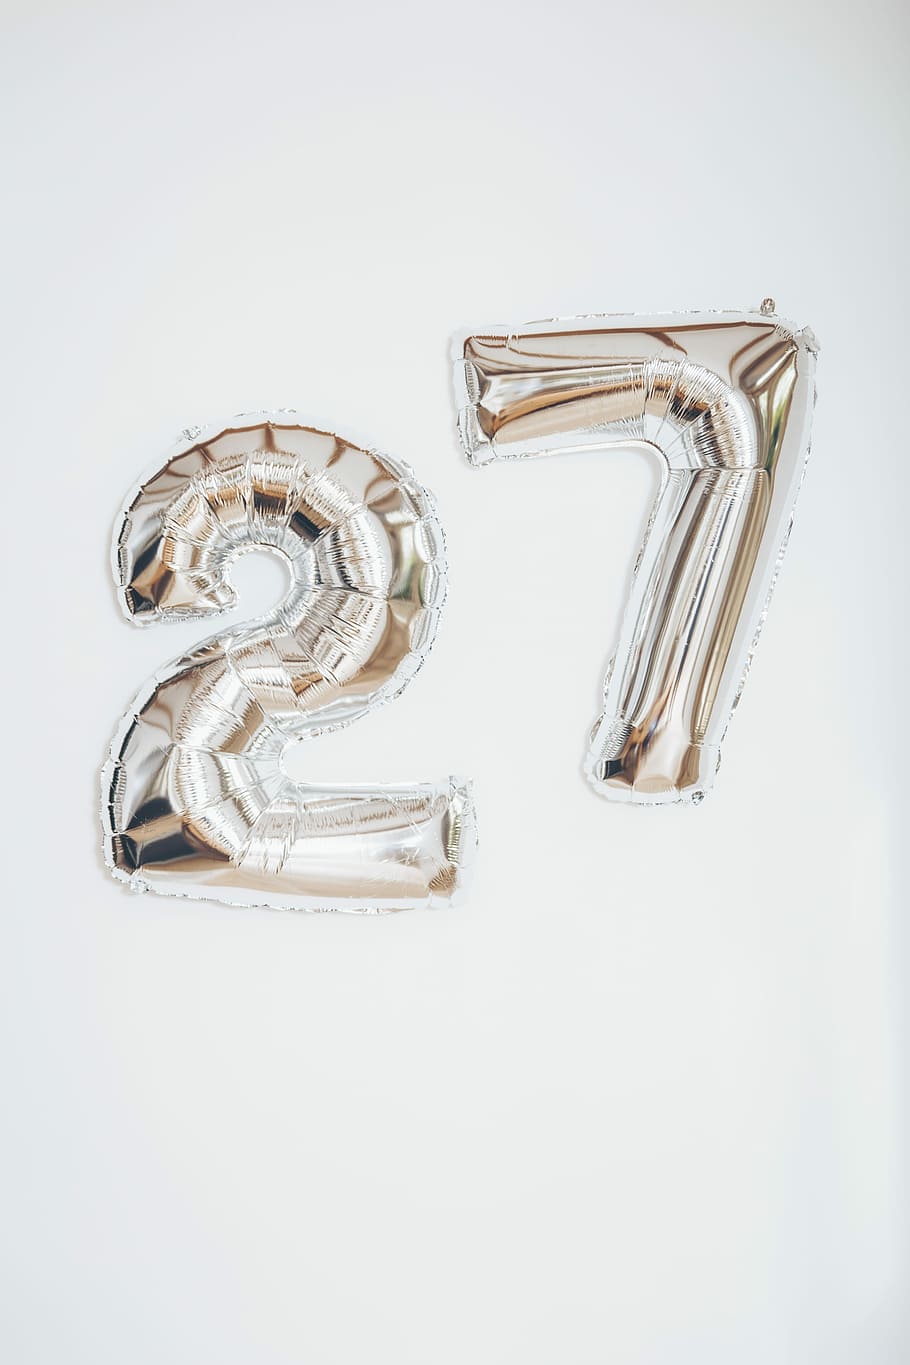 gold 27 balloon, silver 27 inflatable balloon on wall, letters